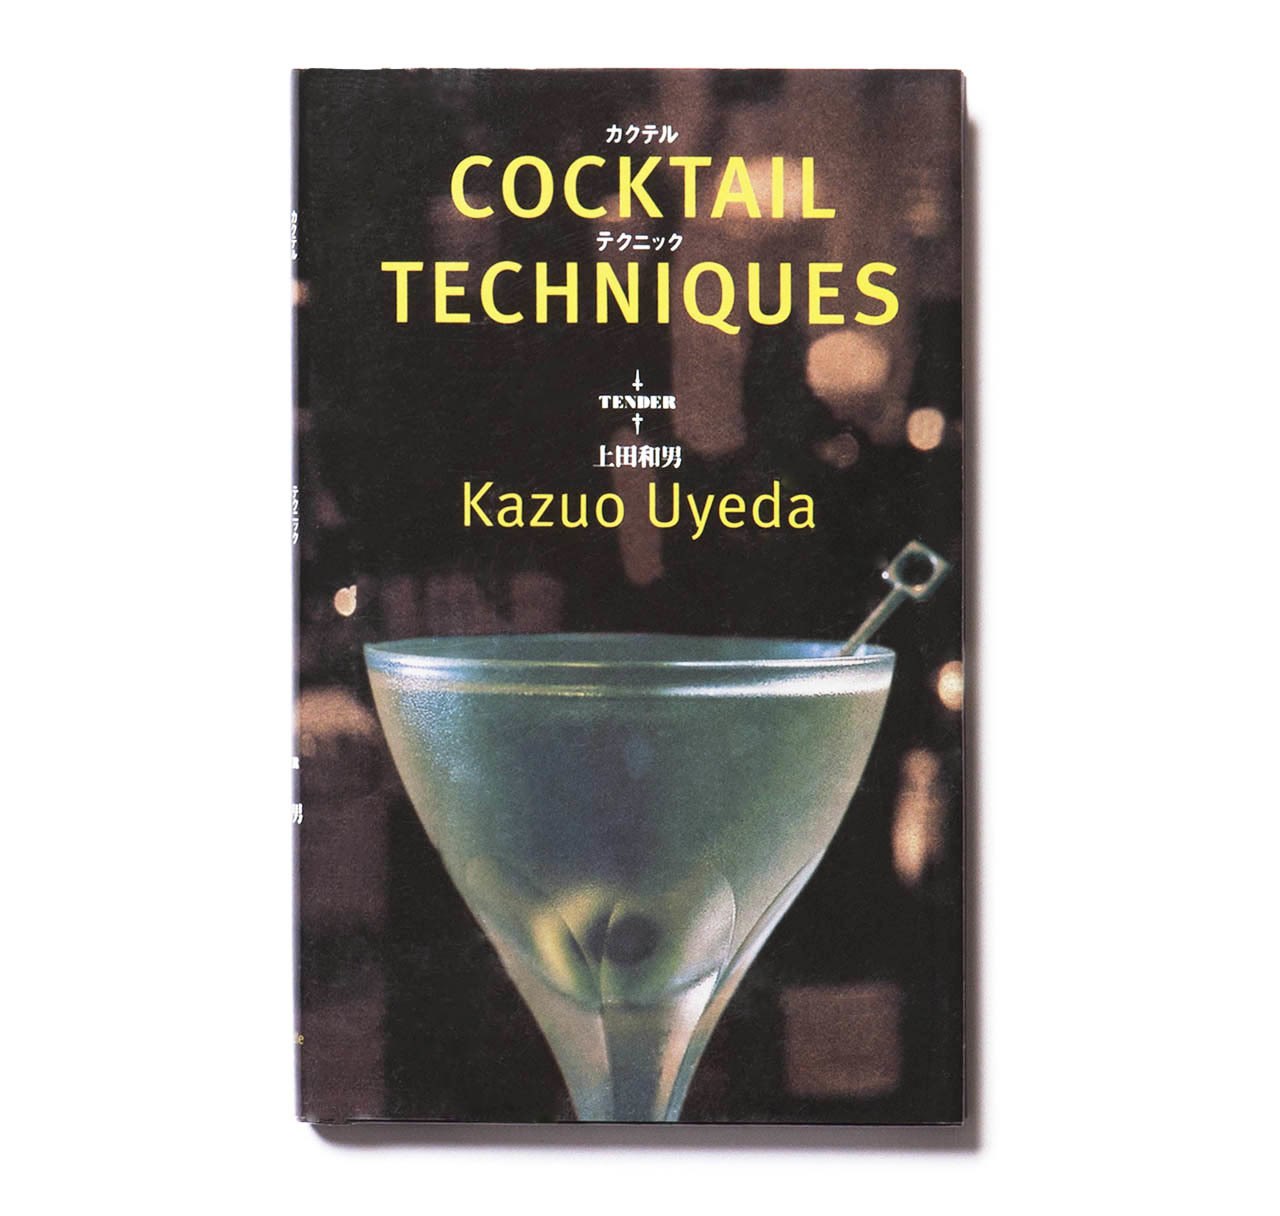 Cocktail Techniques by Kazuo Uyeda